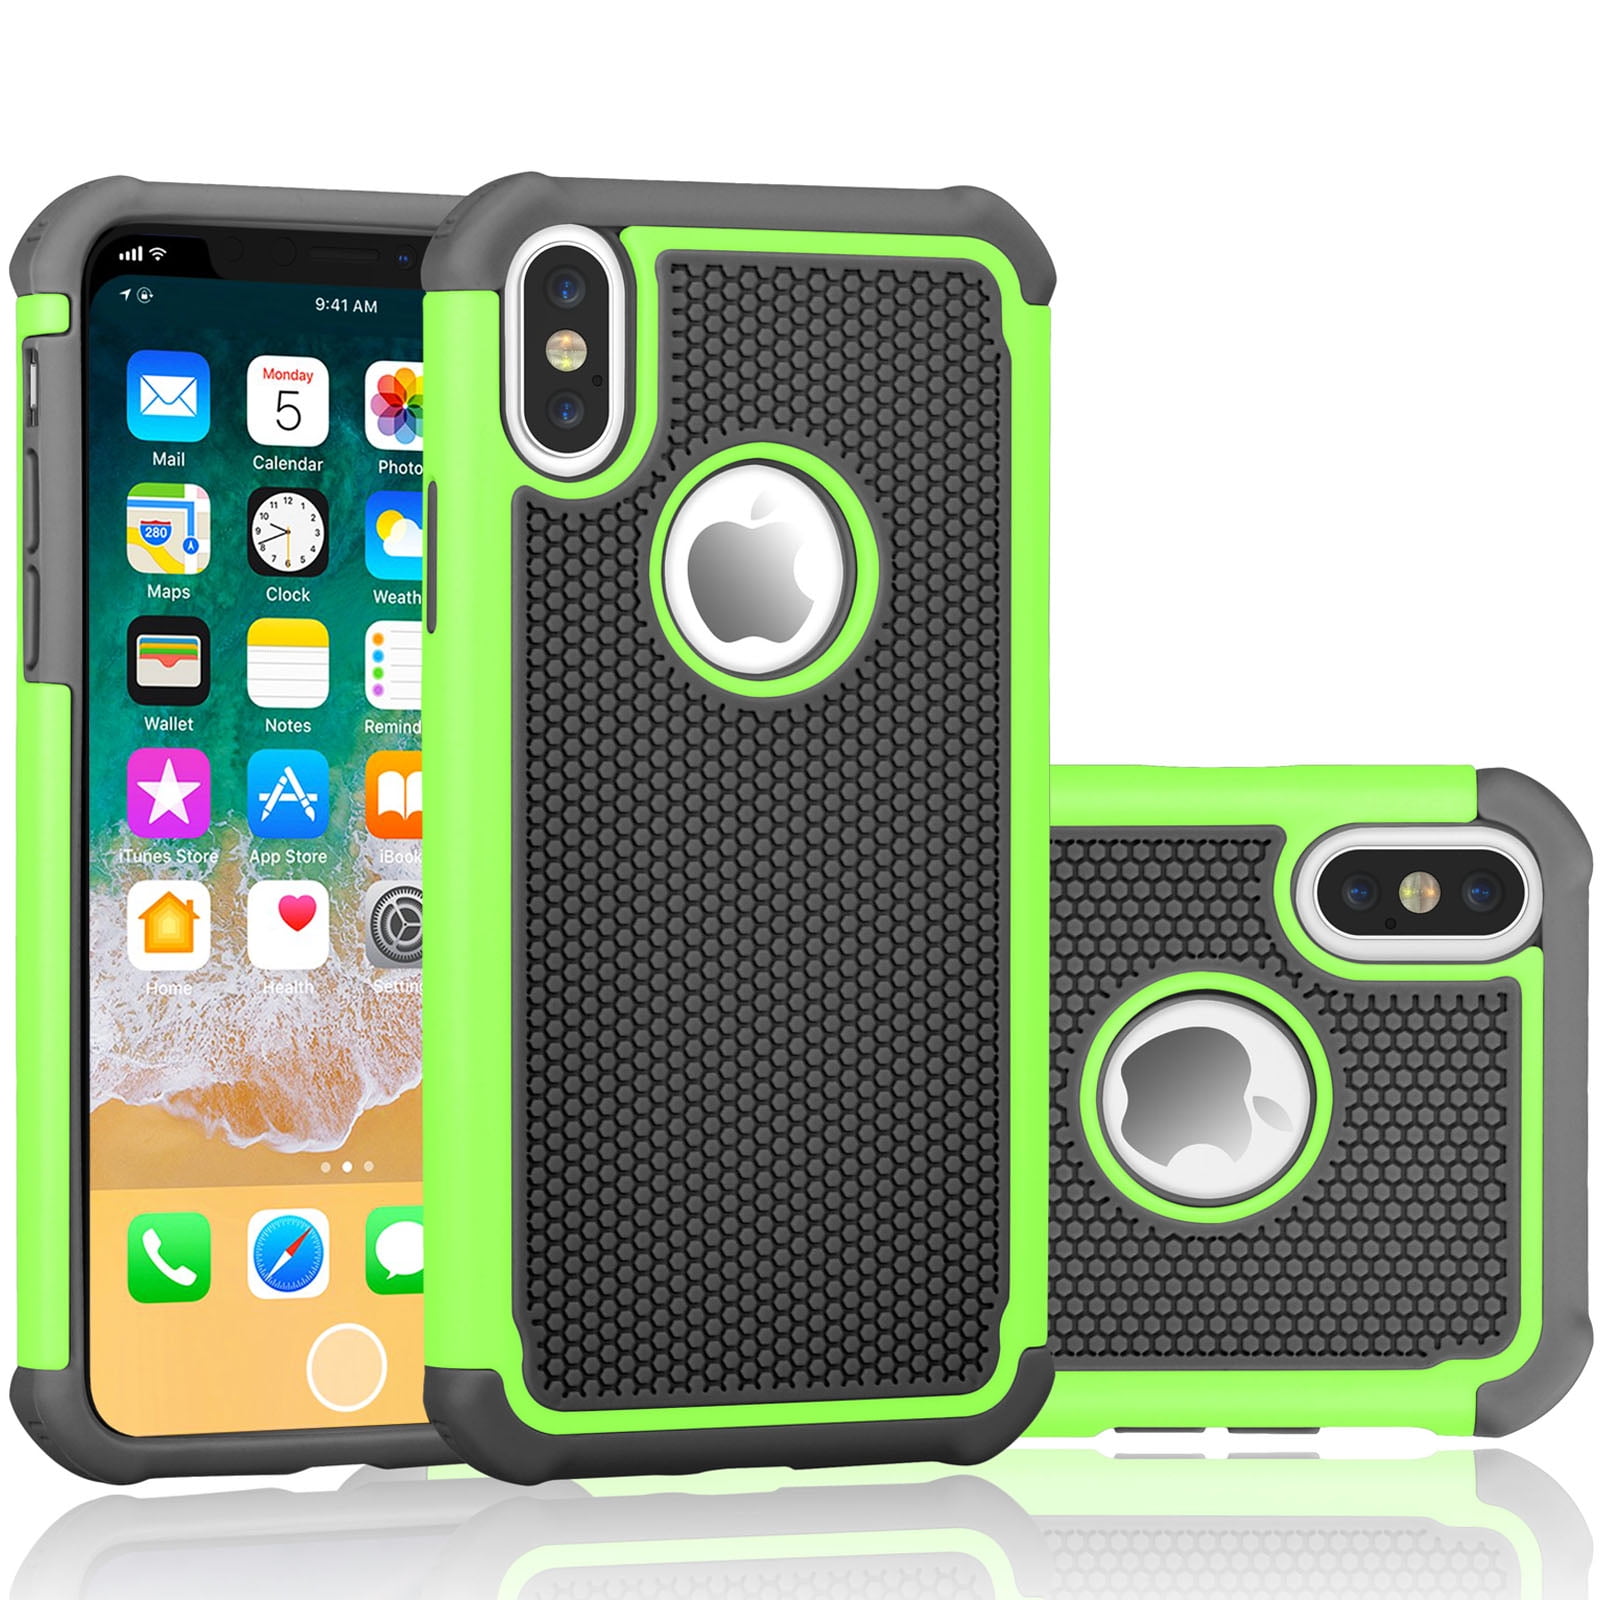 Cases For Iphone Xr Iphone Xs Iphone Xs Max Iphone X Tekcoo Tmajor Shock Absorbing